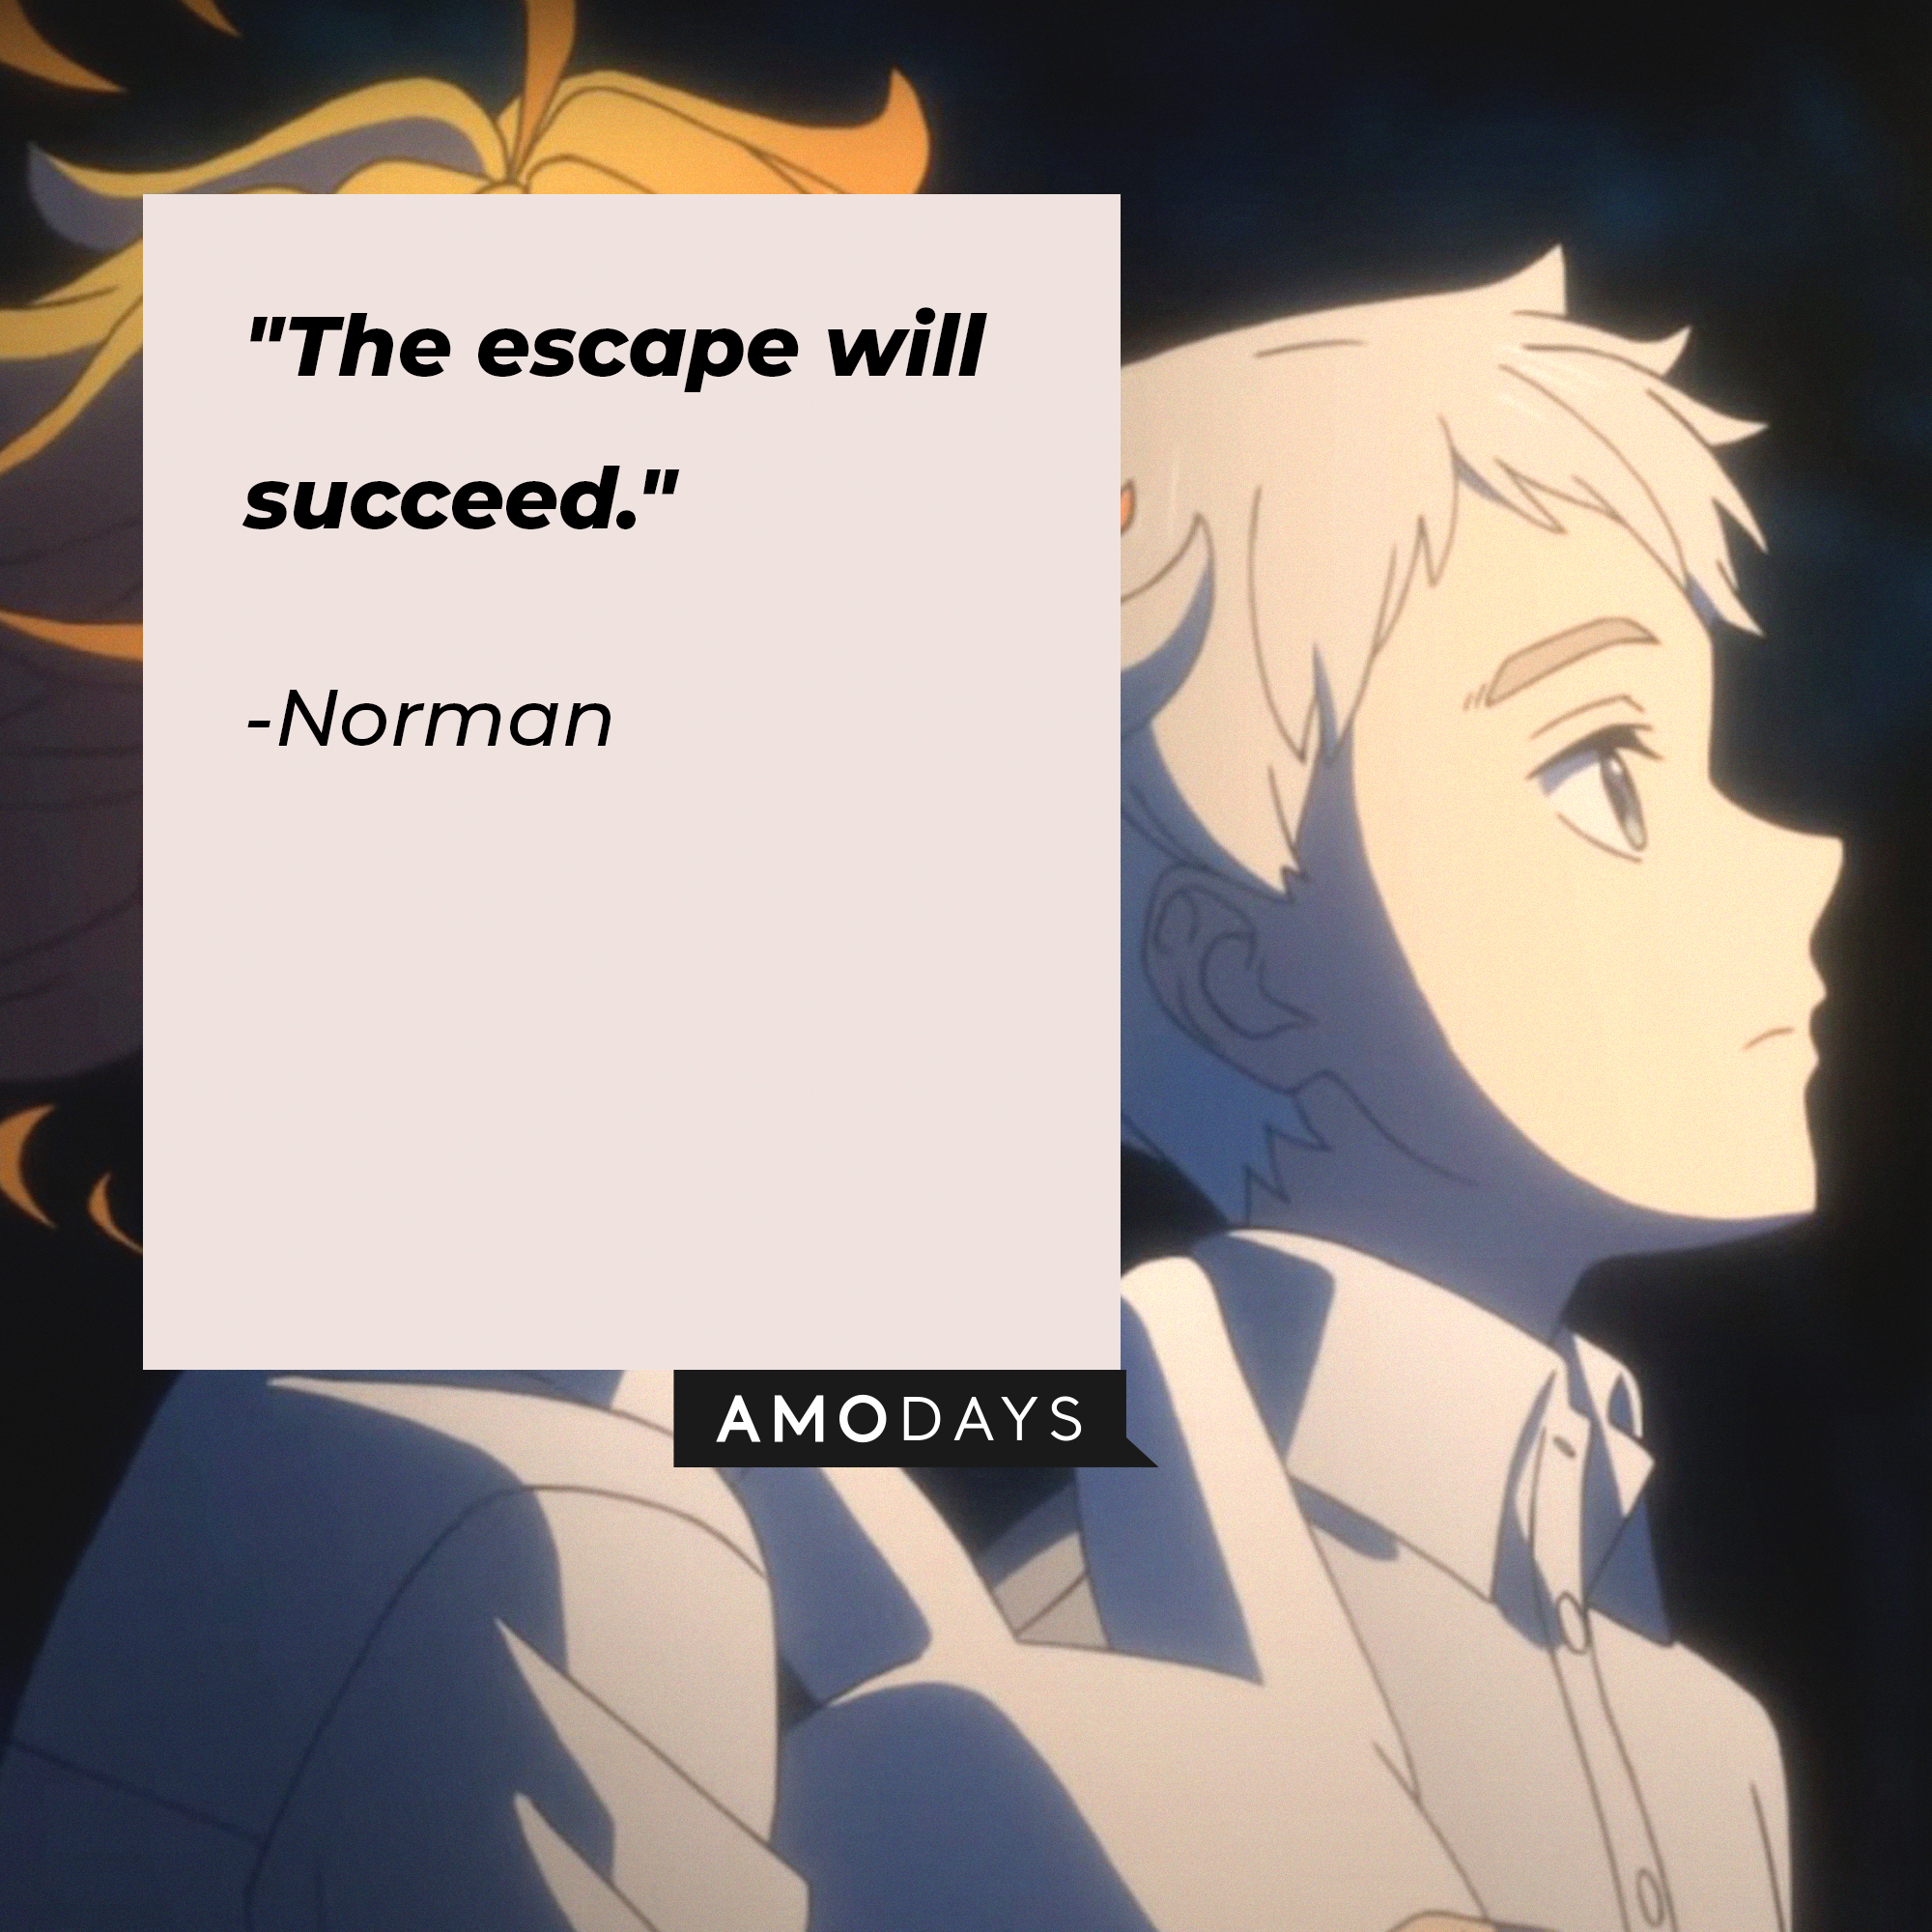 Norman's quote: "The escape will succeed." | Image: AmoDays